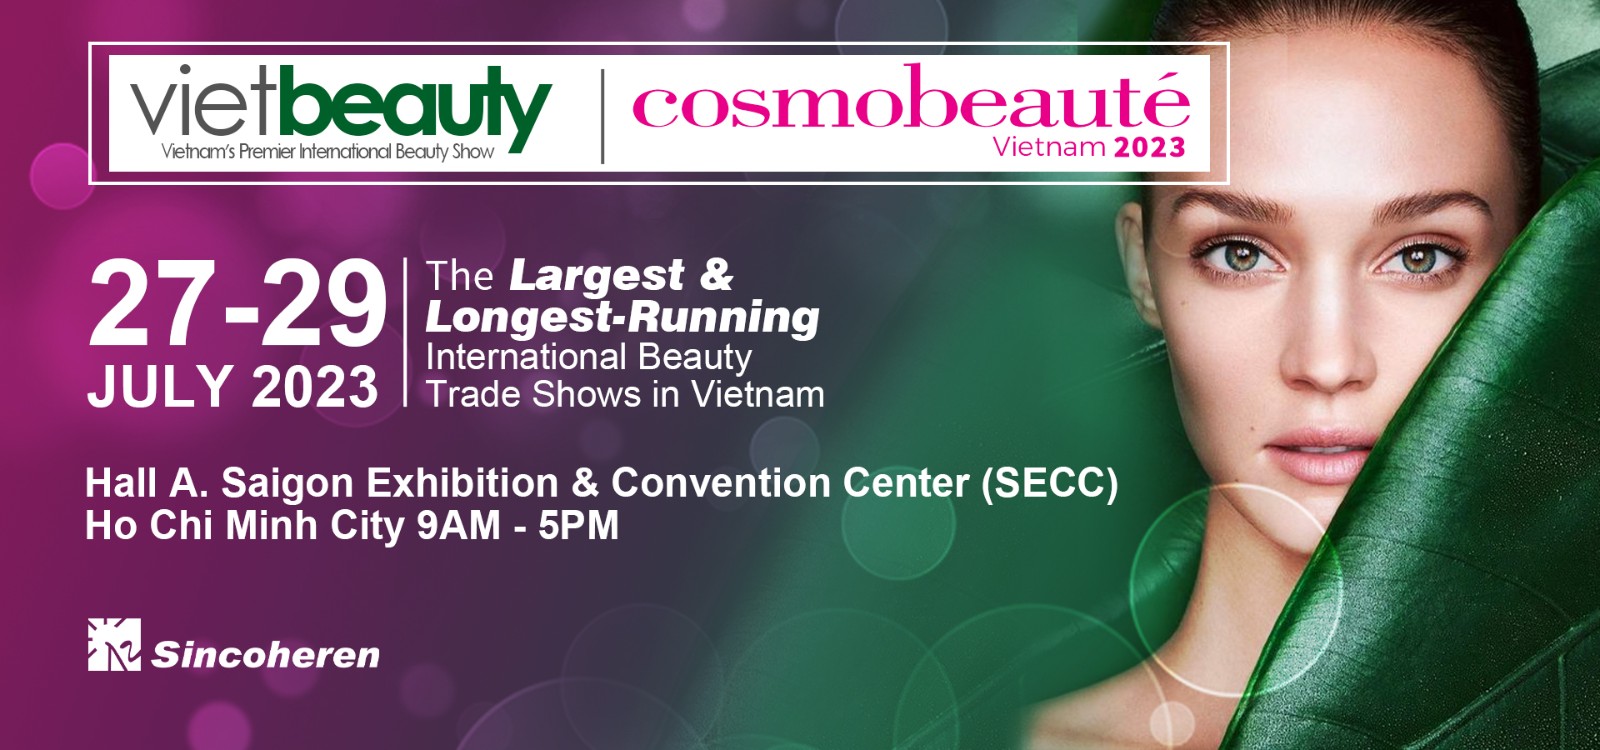 Sincoheren invite you to attend the beauty exhibition of Saigon Exhibition